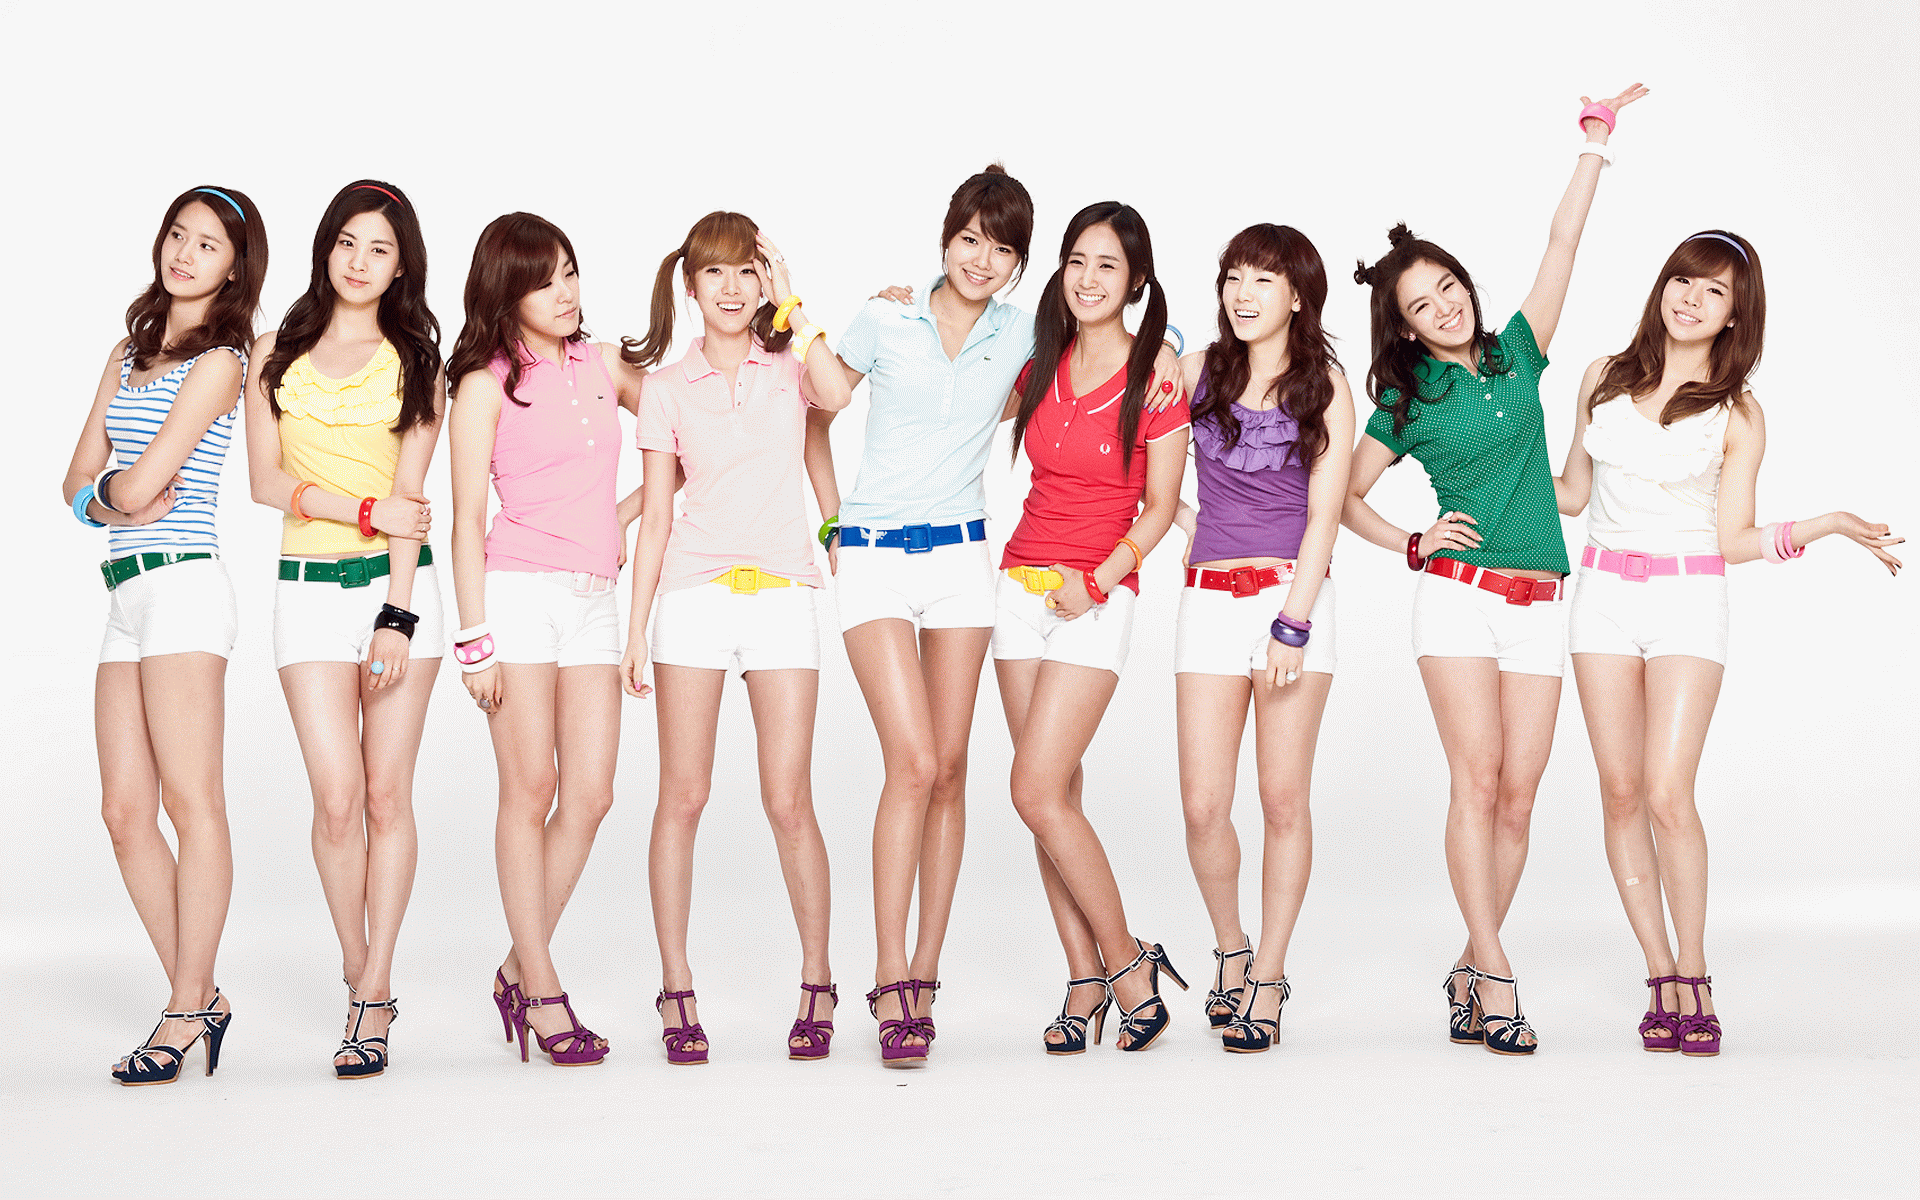 Wallpapers SNSD 2015 - Wallpaper Cave